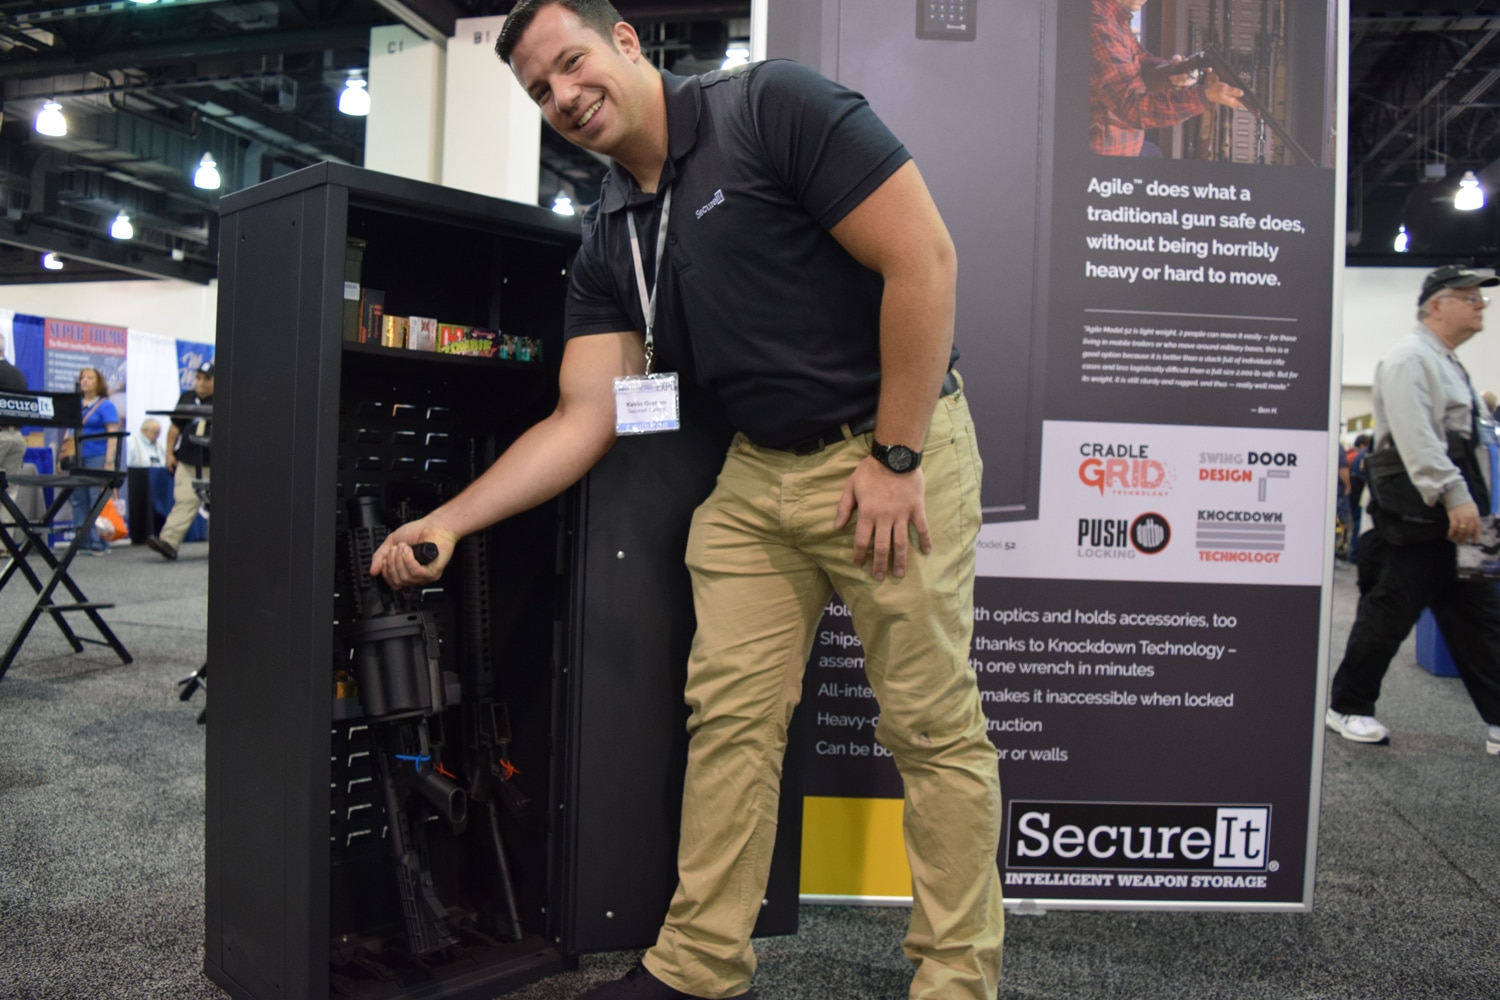 Kevin Graham, marketing coordinator for Secure It, stows his everyday carry in an intelligent firearm storage safe. (Photo: Daniel Terrill/Guns.com)